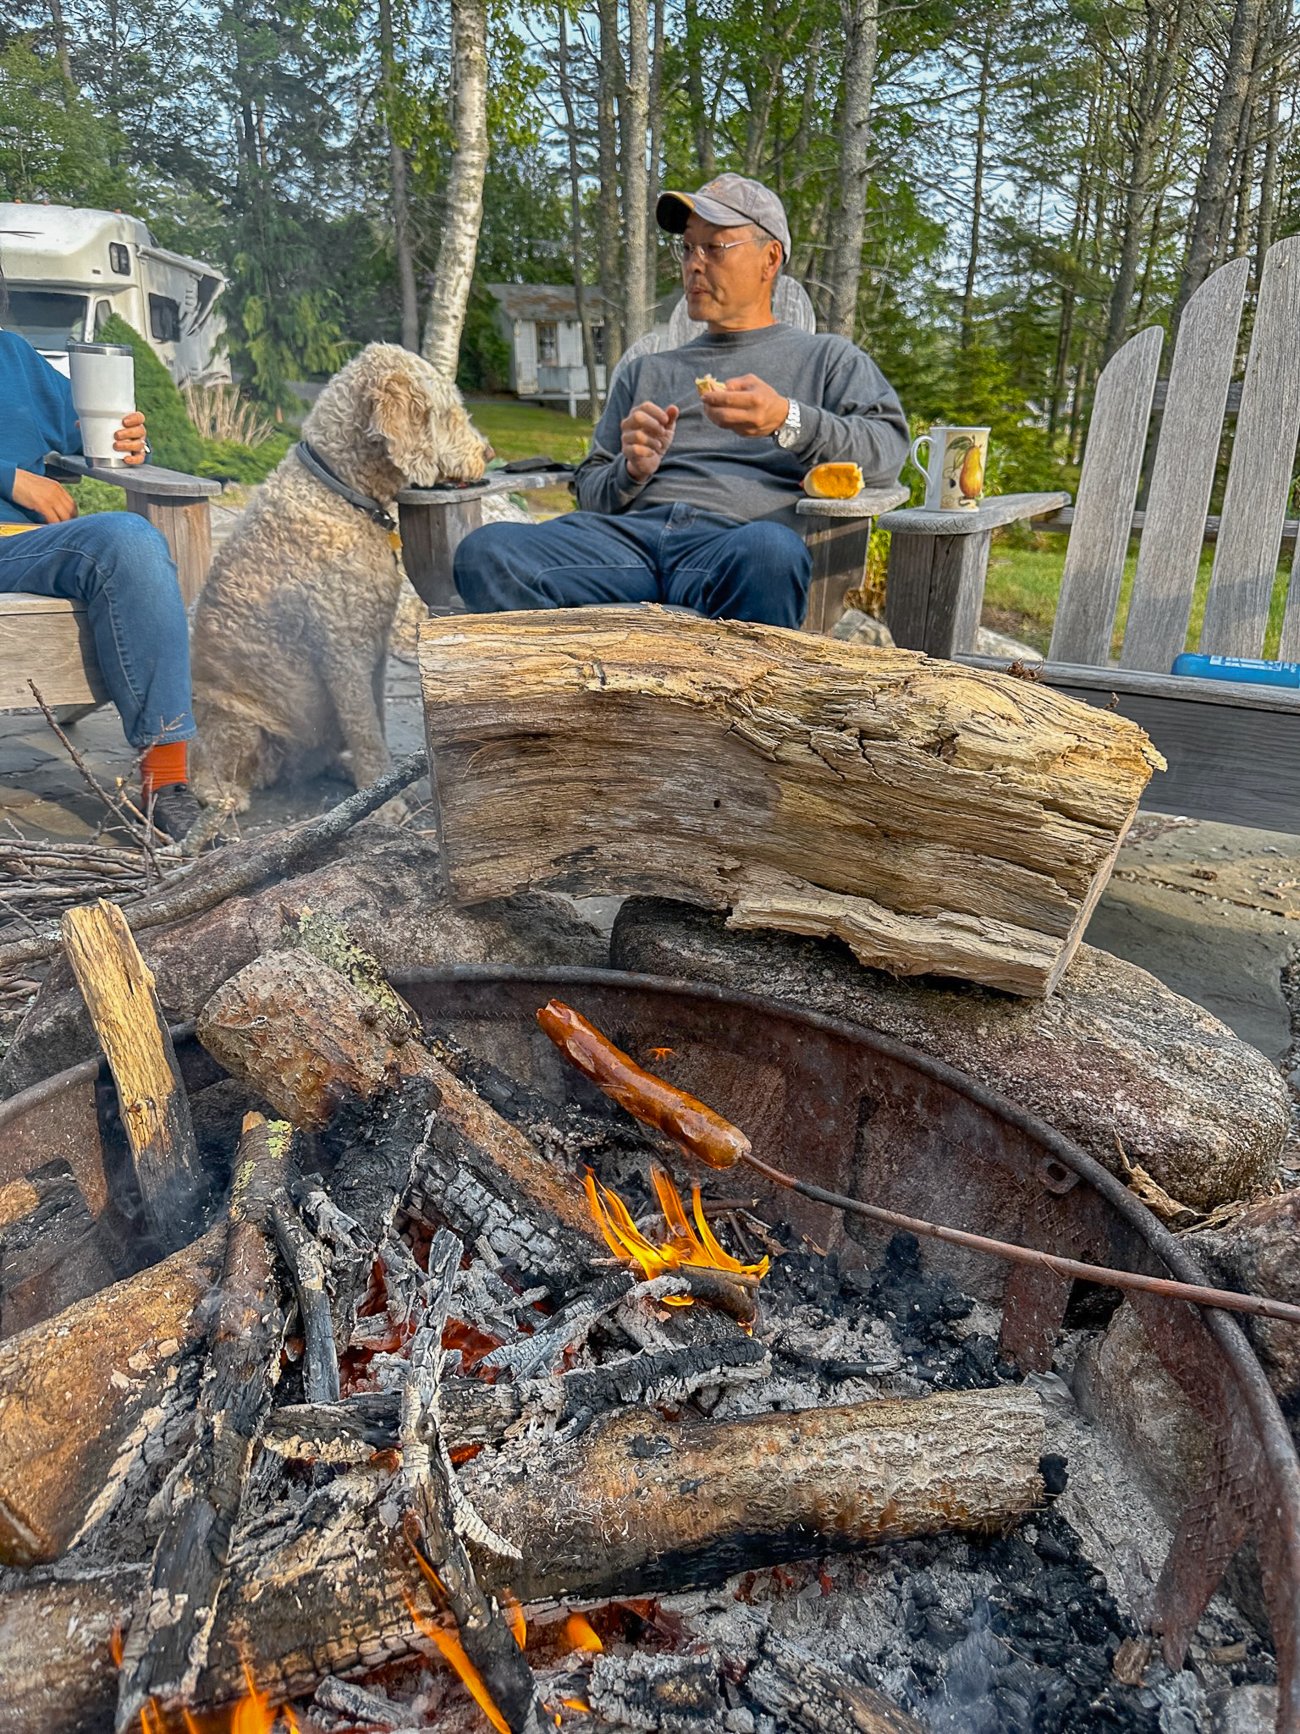 A hotdog over the fire with dog waiting for a treat